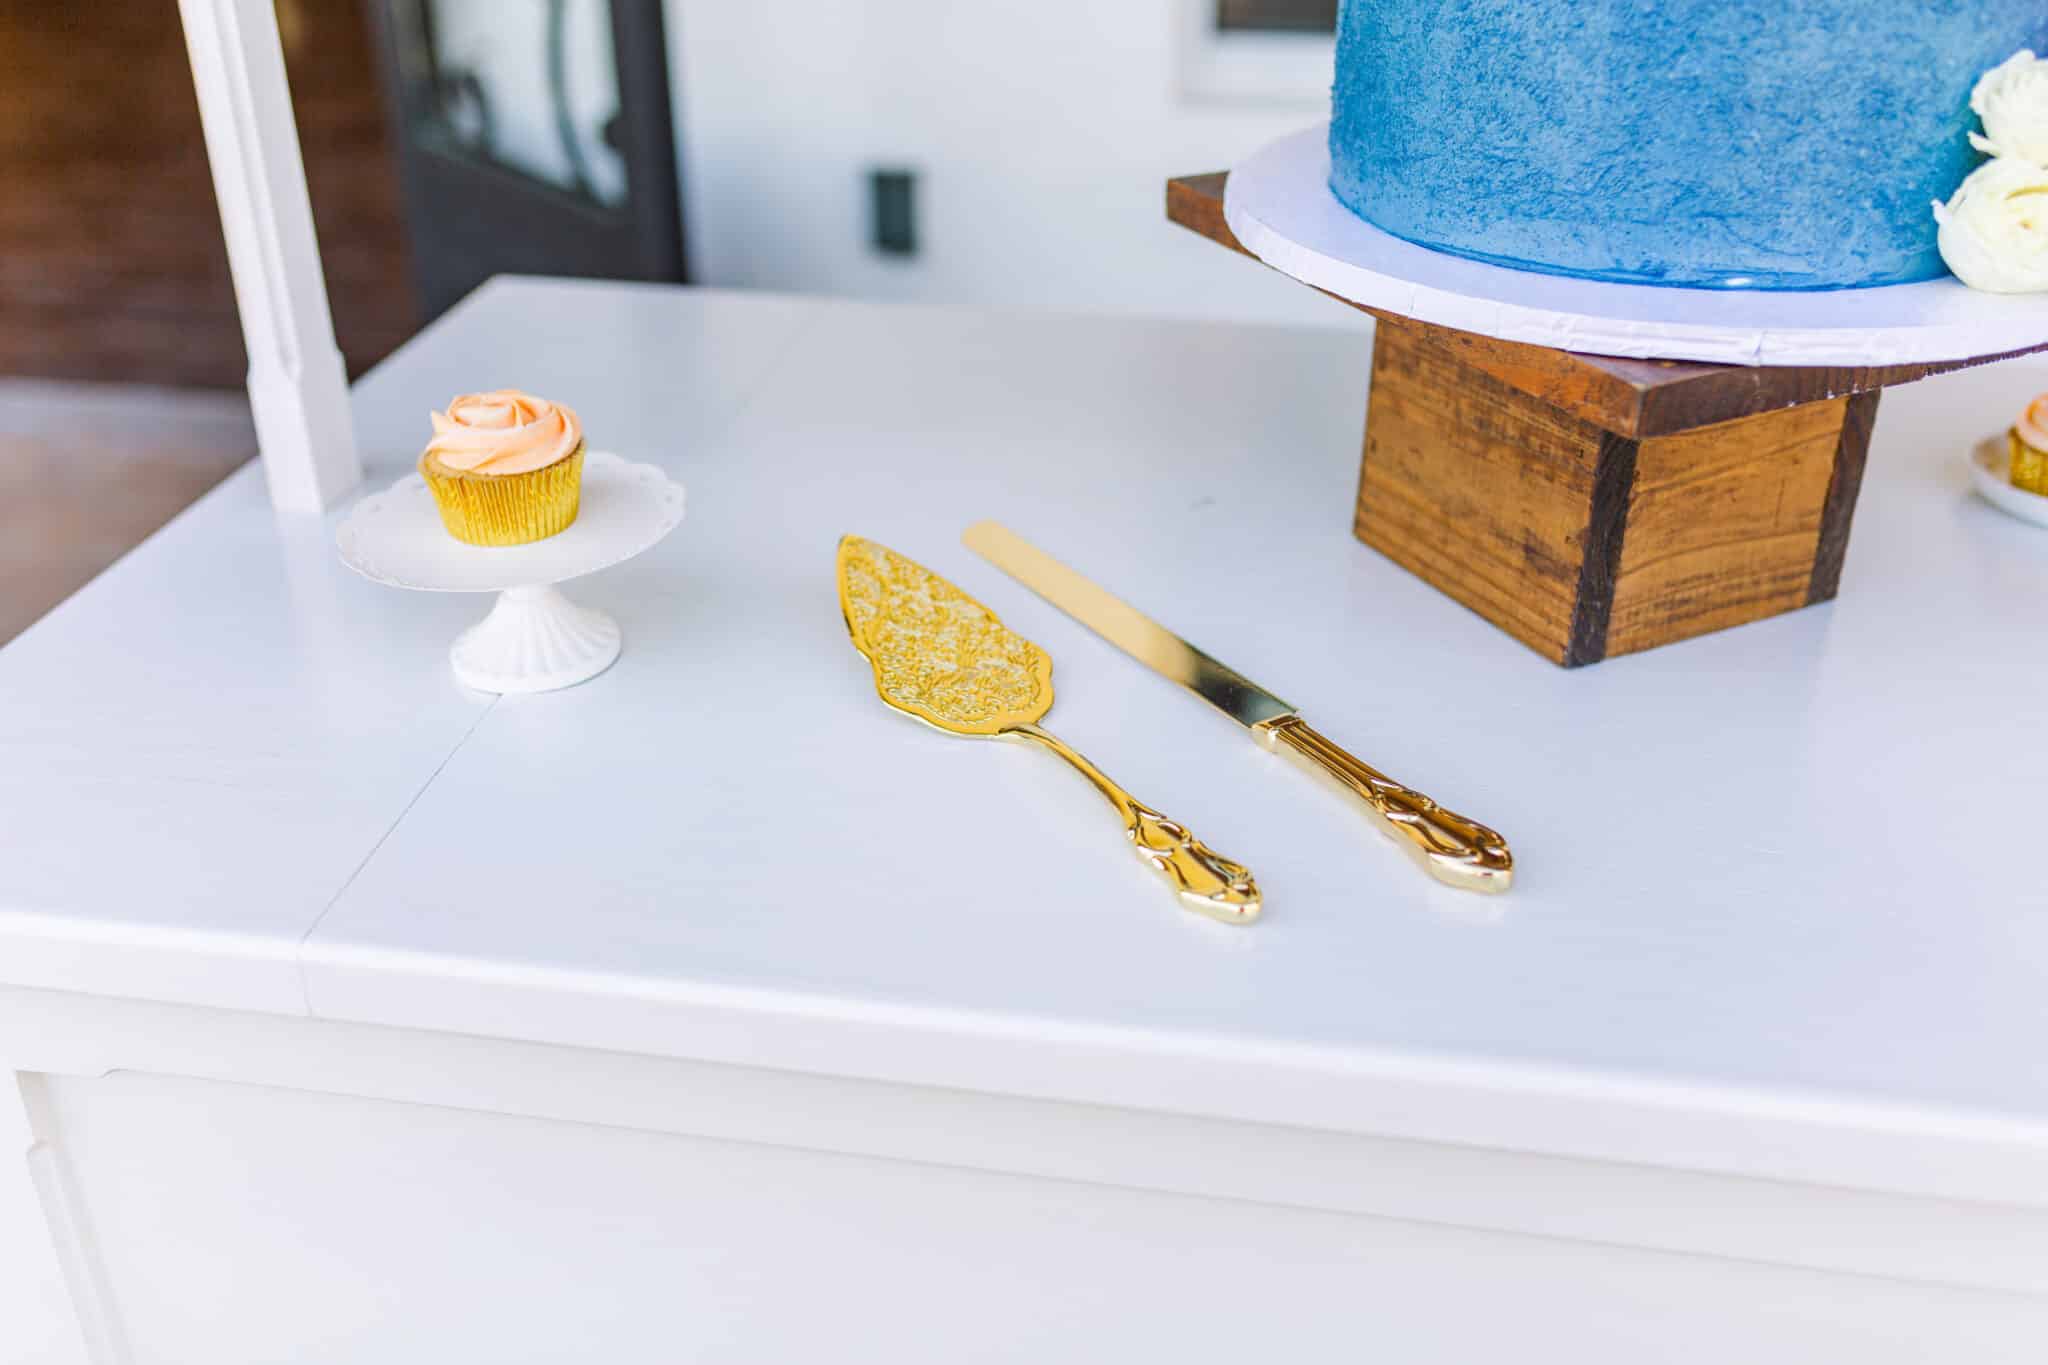 close up of cake cutting set sitting on the table next to a single cupcake on a tiny stand and a wooden cake stand next to it